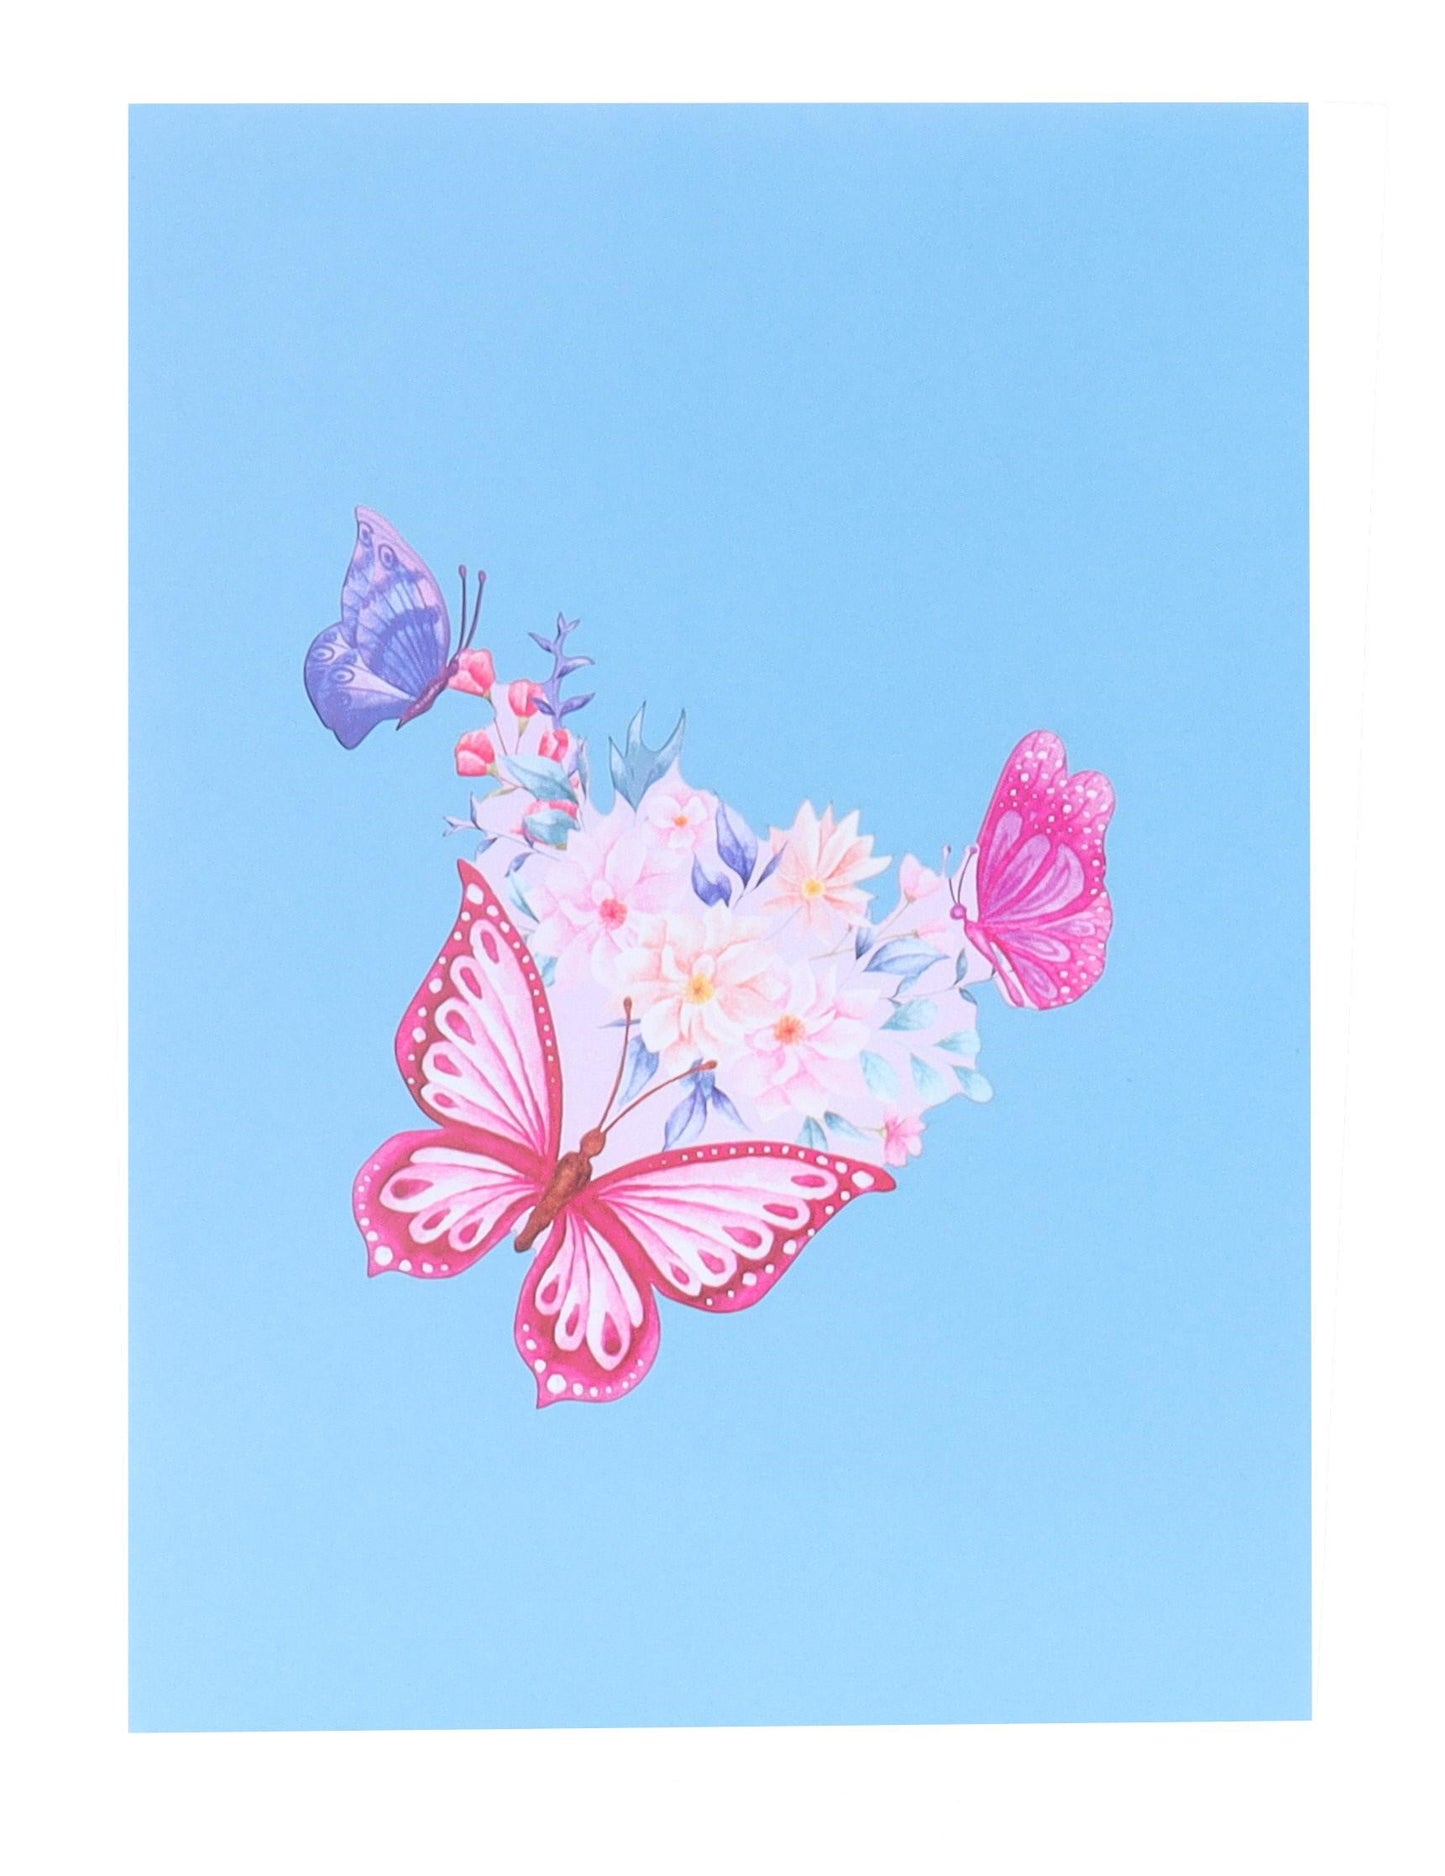 Flying Butterflies 3D Pop Up Greeting Card - Birthday - Brighten Someone’s Day - earth day - Friends - iGifts And Cards